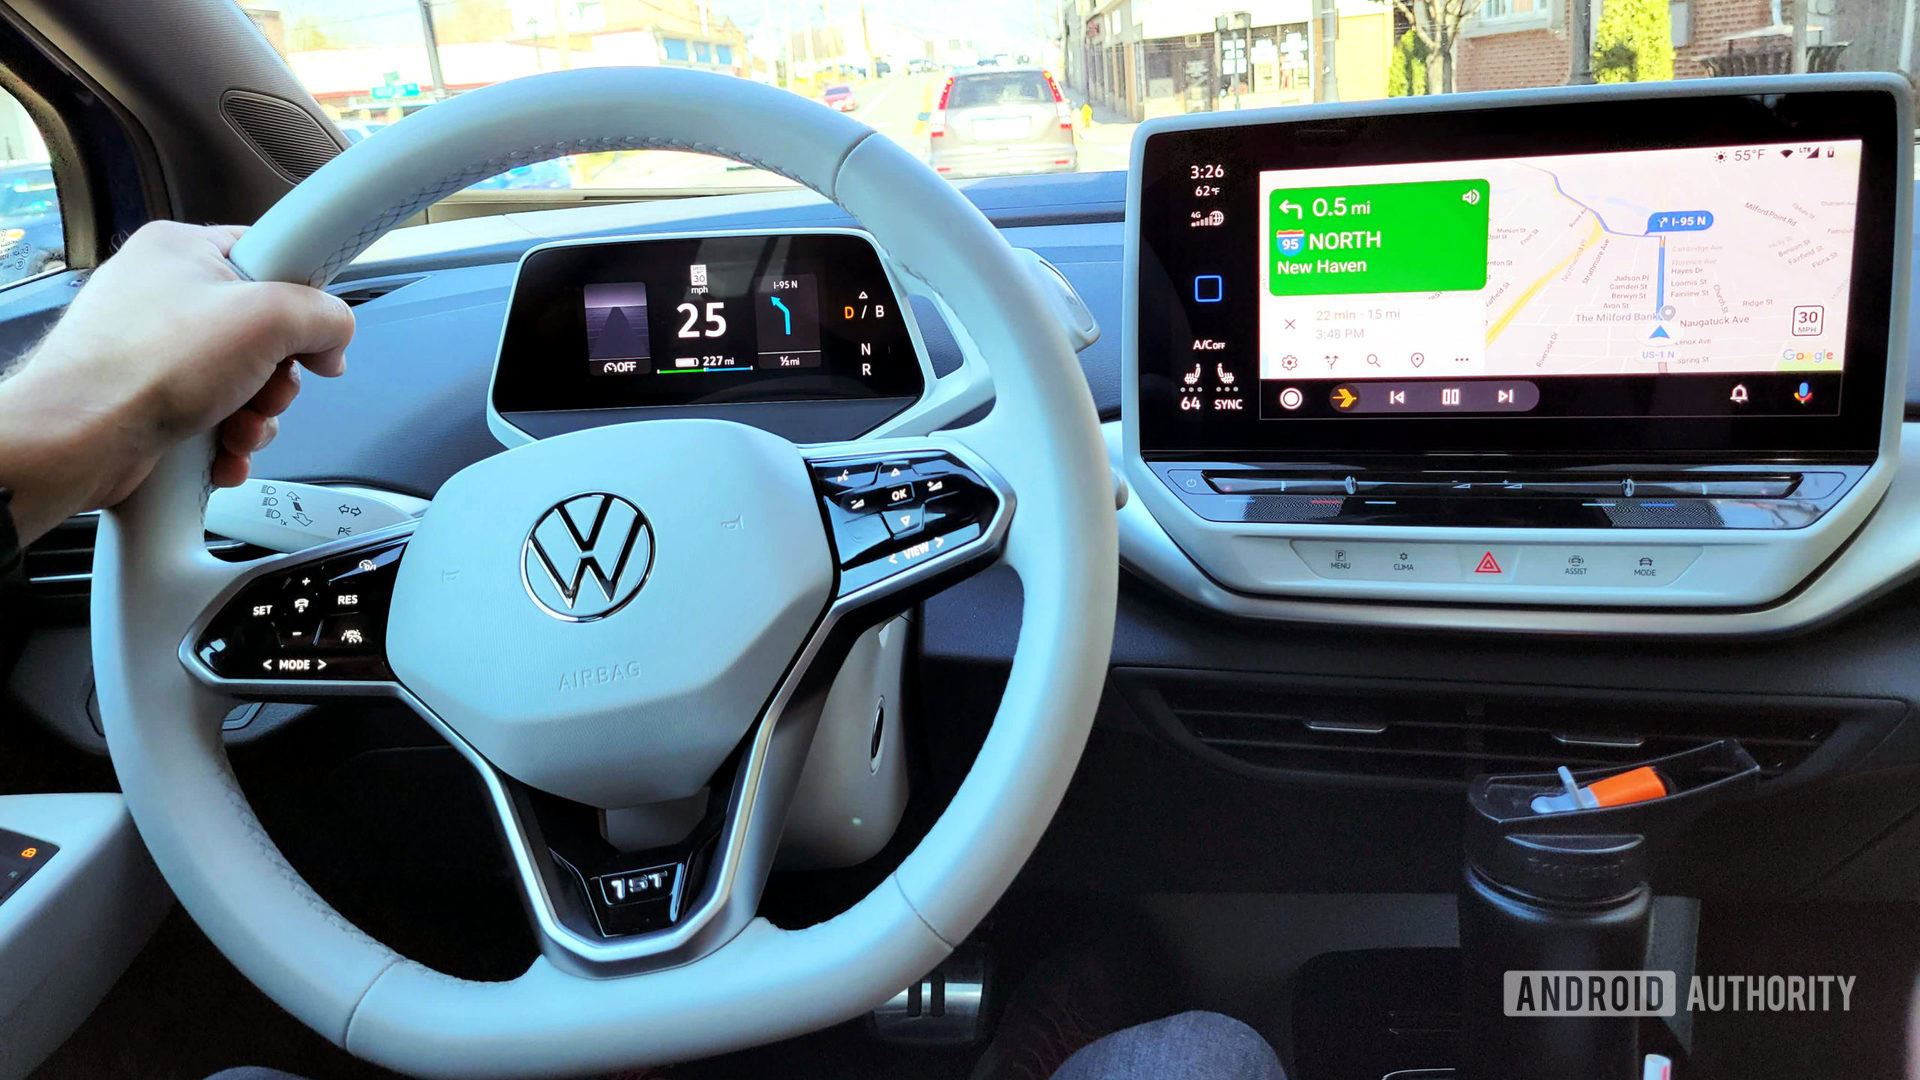 https://www.androidauthority.com/wp-content/uploads/2021/04/Android-Auto-in-Volkswagen-ID.4-Center-Console-Interaction-with-Drivers-Console-scaled.jpg